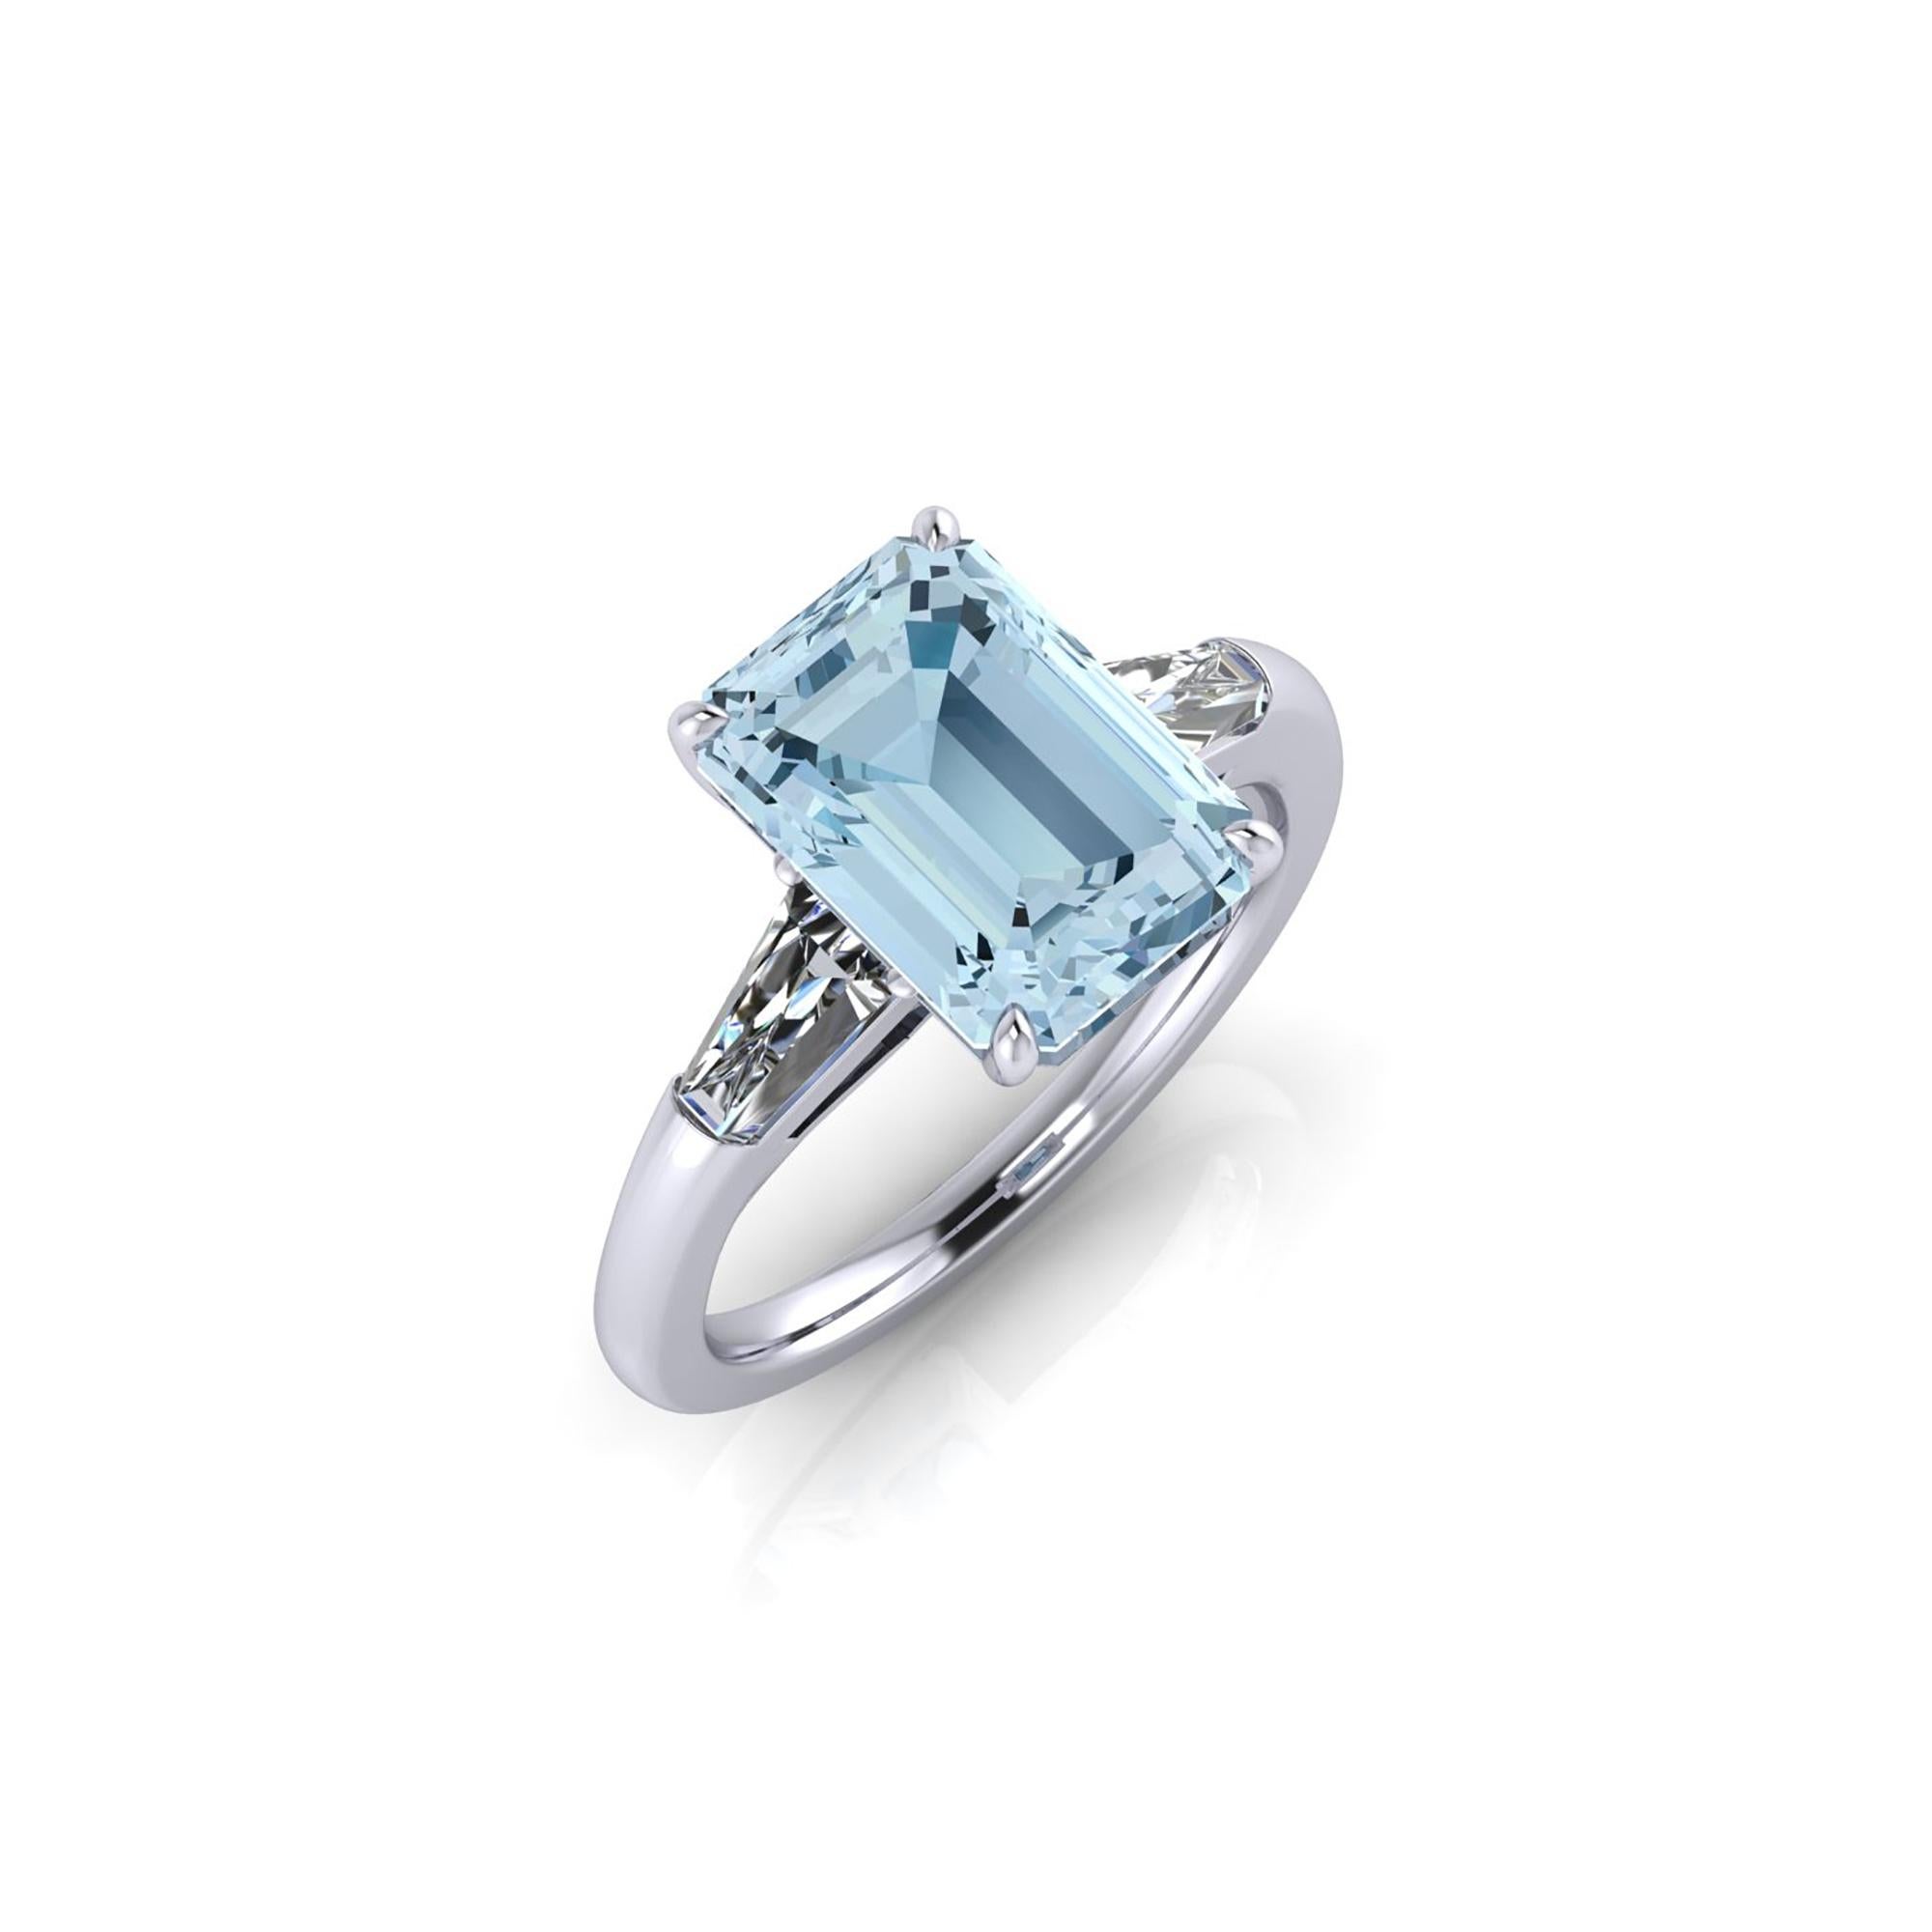 An exquisite 3.43 carat aquamarine, emerald cut accompanied two, tapered baguette, 0.42 carat total diamonds, G color, Vs clarity, 
set in an hand crafted, delicate and sophisticated looking platinum ring, manufactured with the best Italian